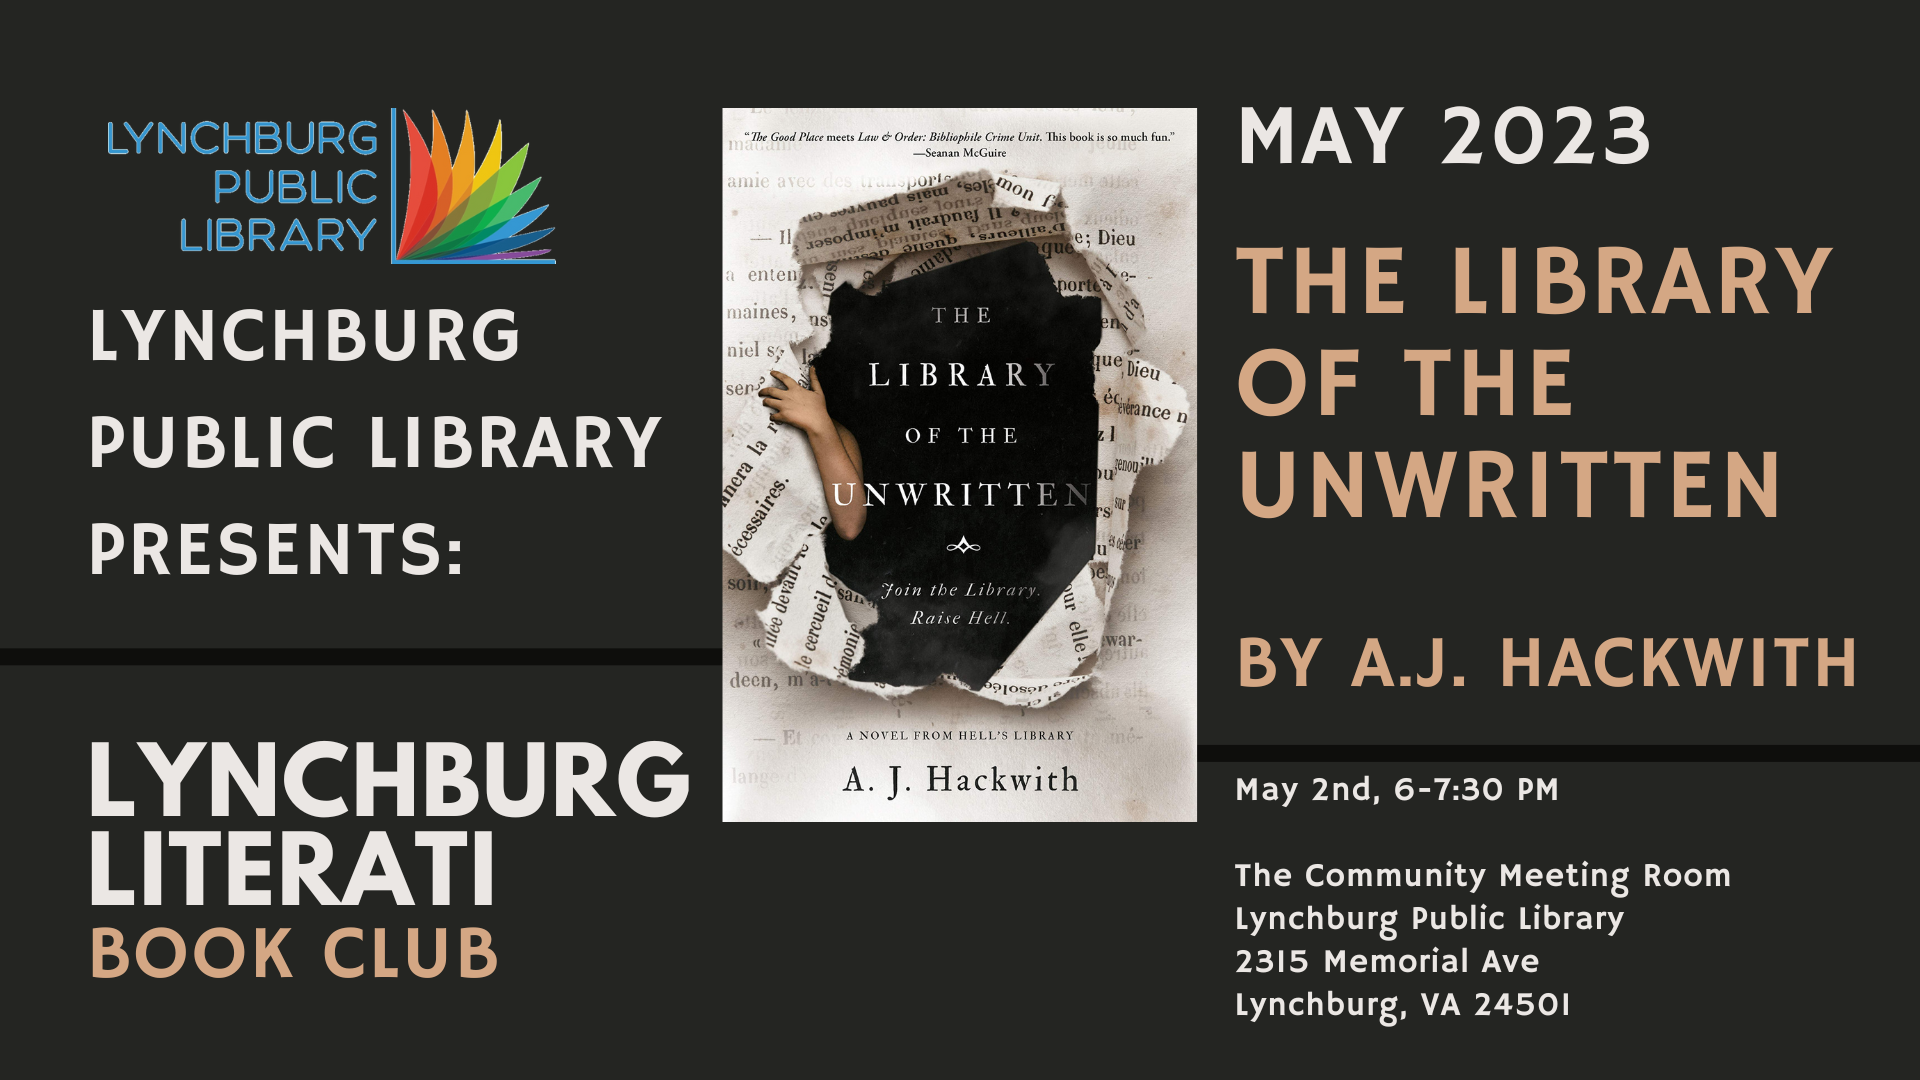 lynchburg public library presents lynchburg literati book club; may 2023, the library of the unwritten by a.j. hackwith, may 2nd, 6-7:30 pm, the community meeting room, lynchburg public library, 2315 memorial ave, lynchburg, va 24501